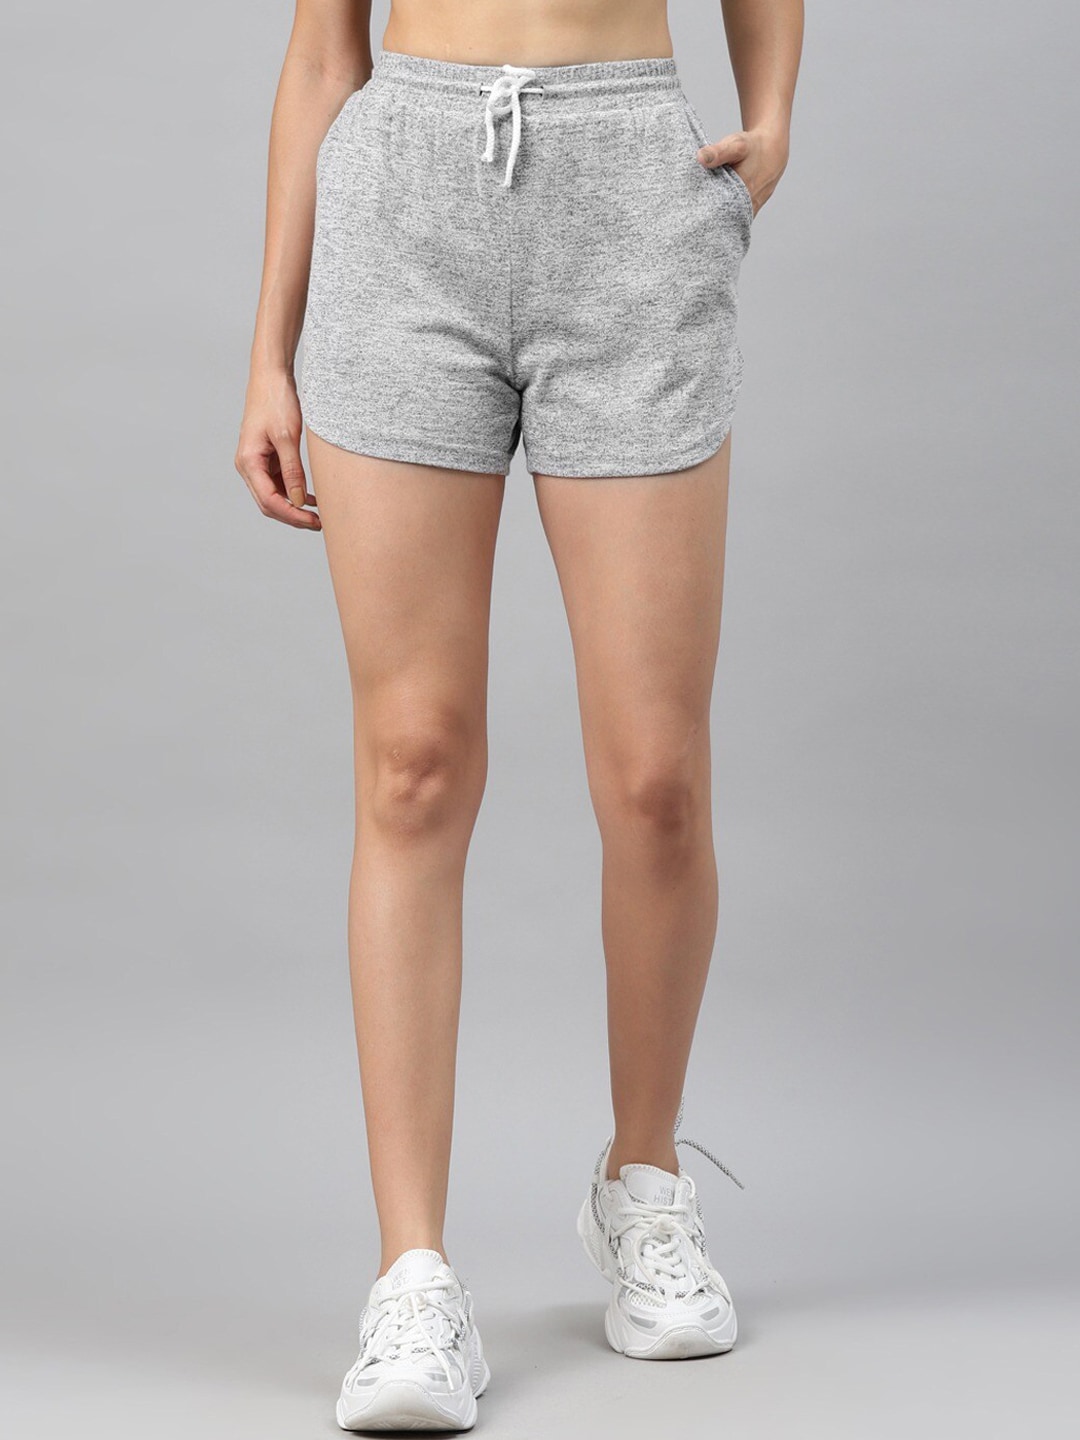 Laabha Women Slim Fit Mid-Rise Cotton Shorts Price in India